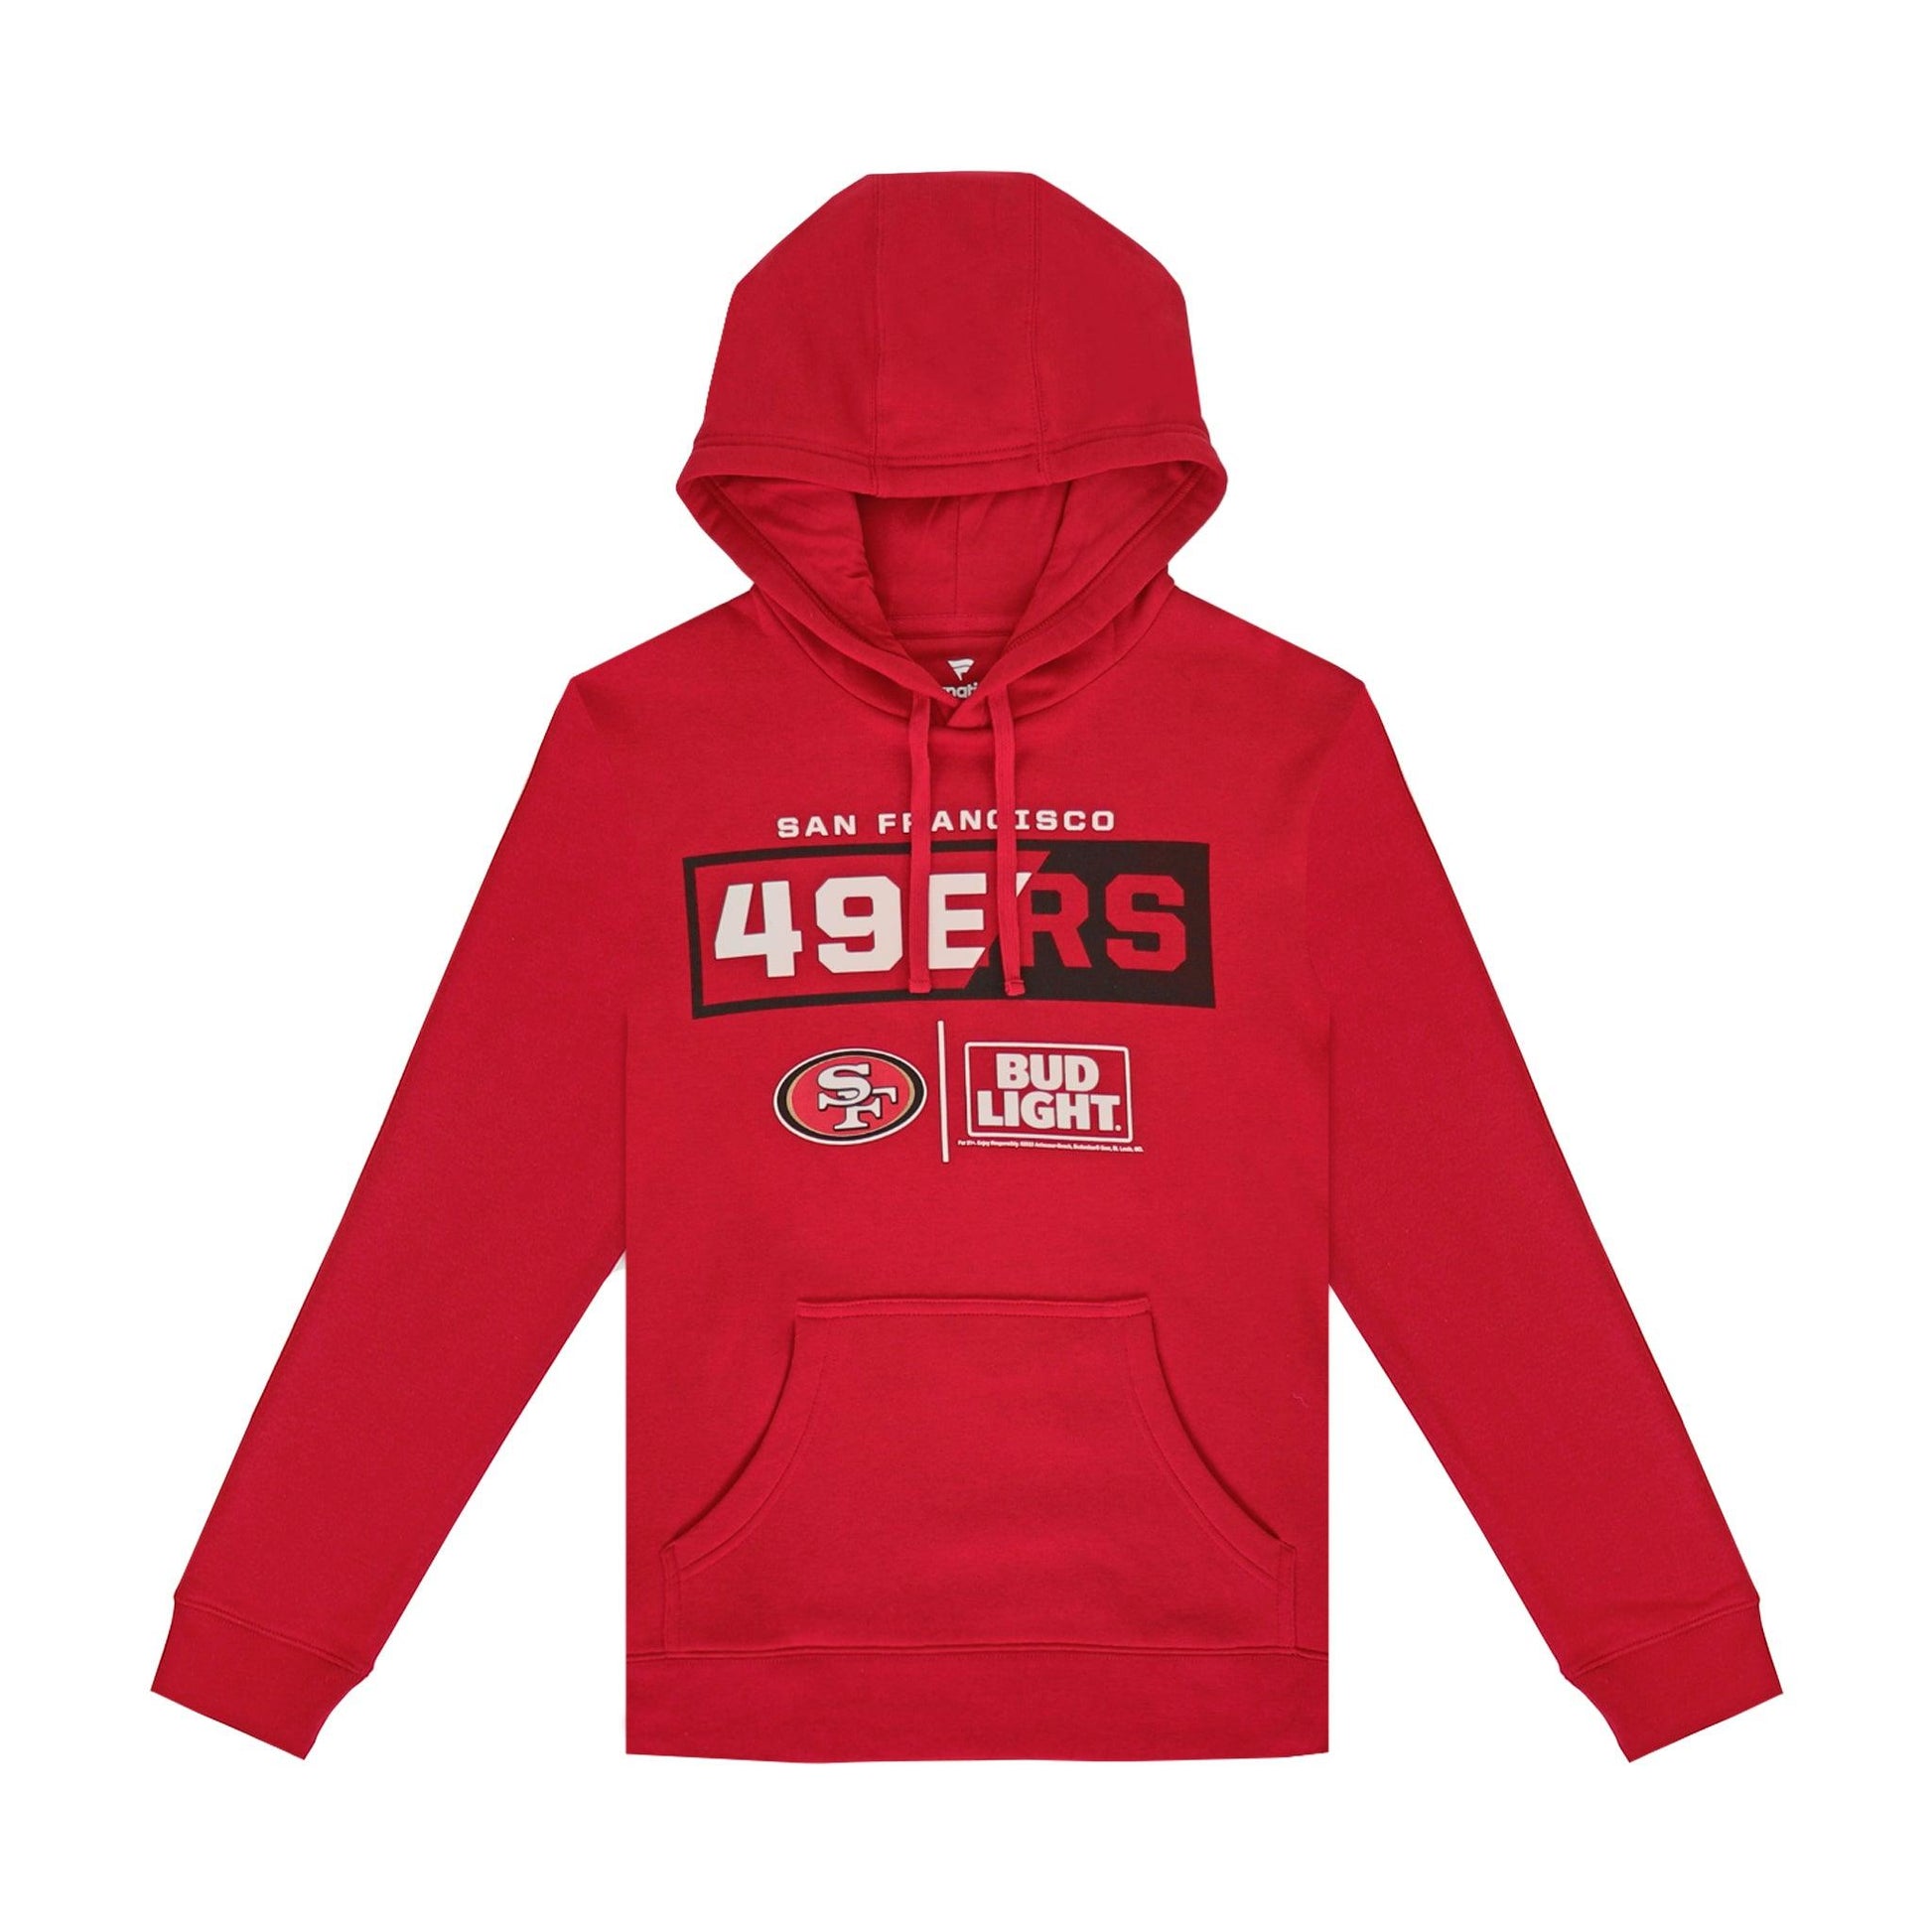 49ers and bud light logo on red hoodie front